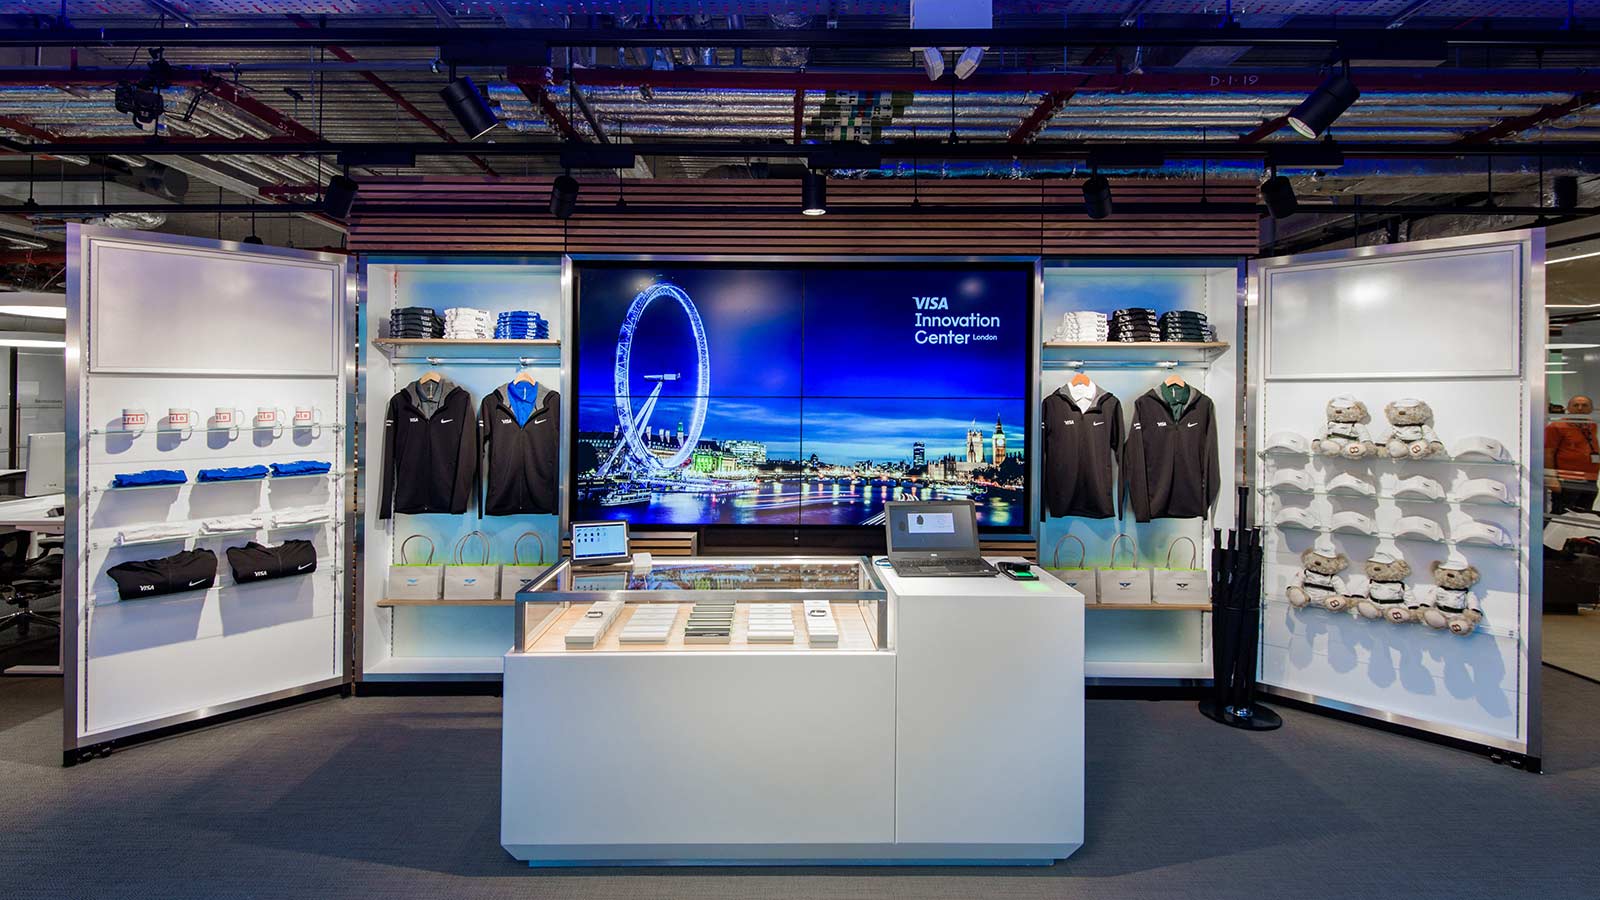 Visa London Innovation Center retail space showcasing multiple solutions for the payment ecosystem.